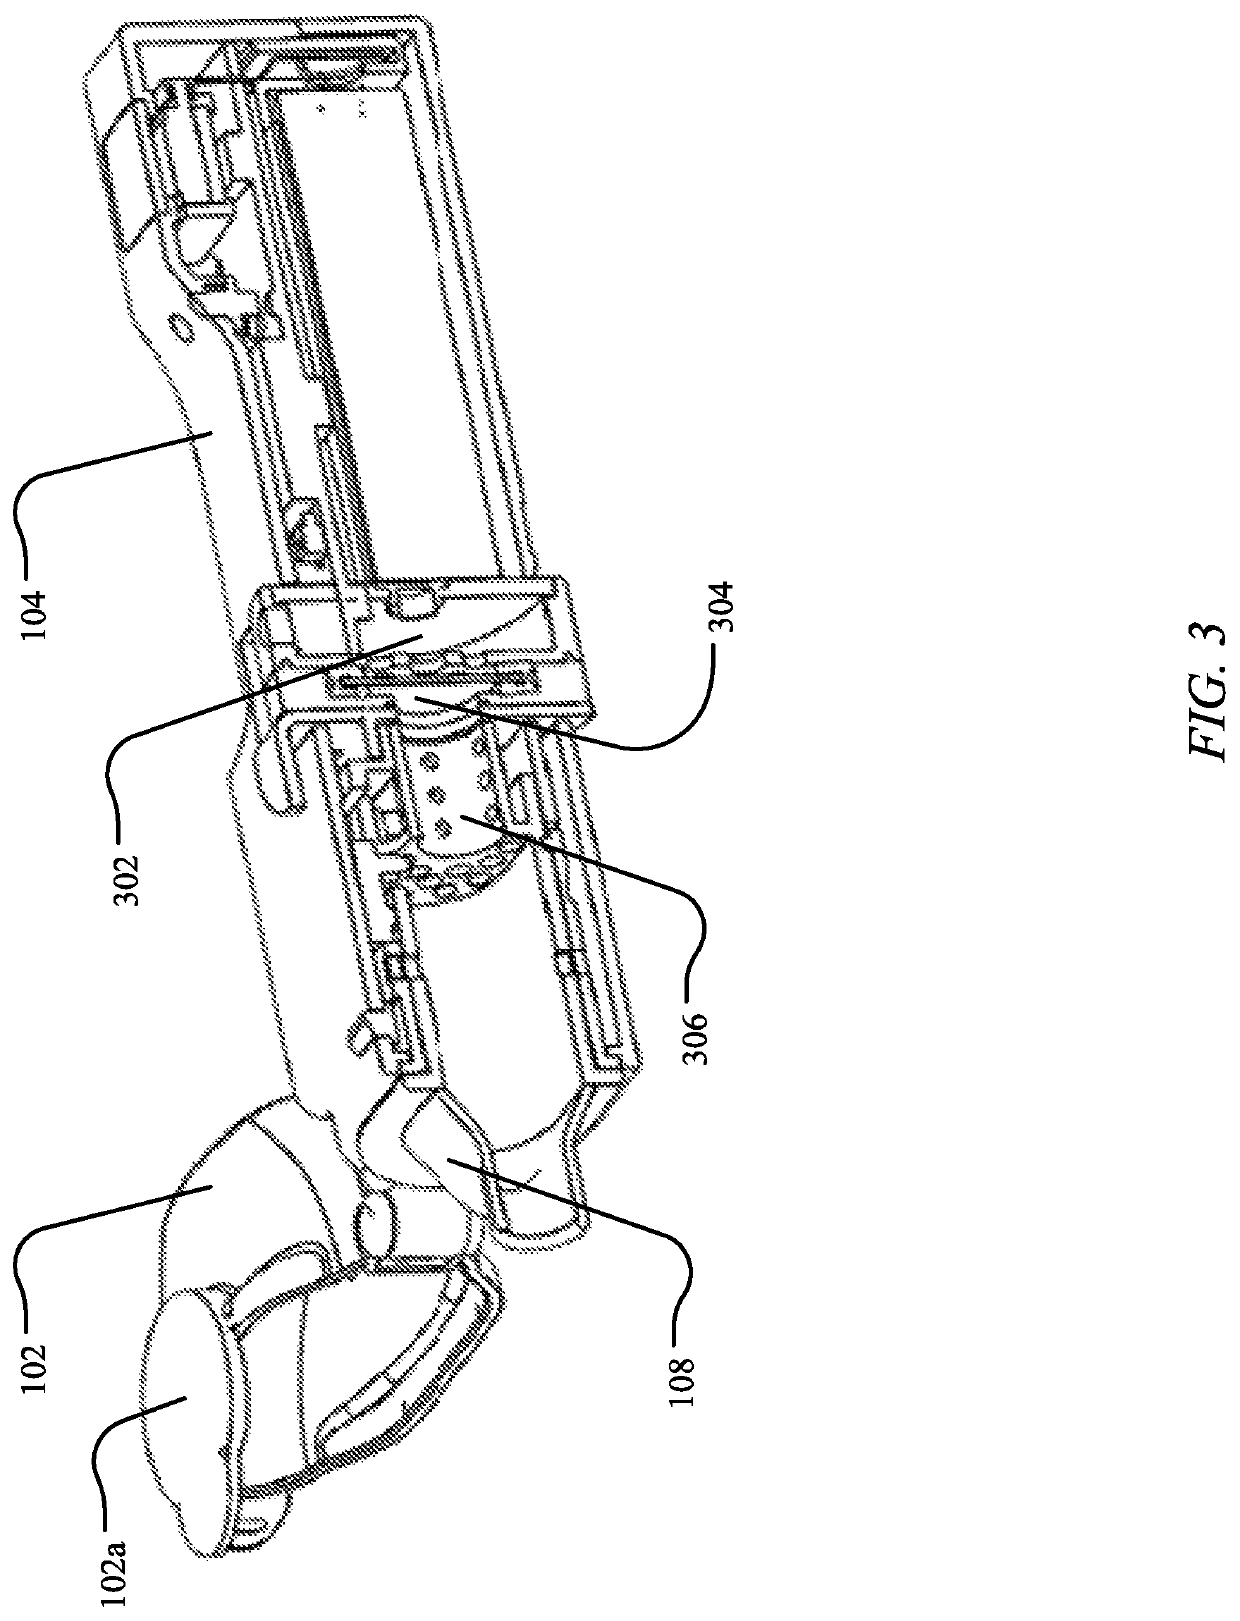 Nasal drug delivery apparatus and methods of use